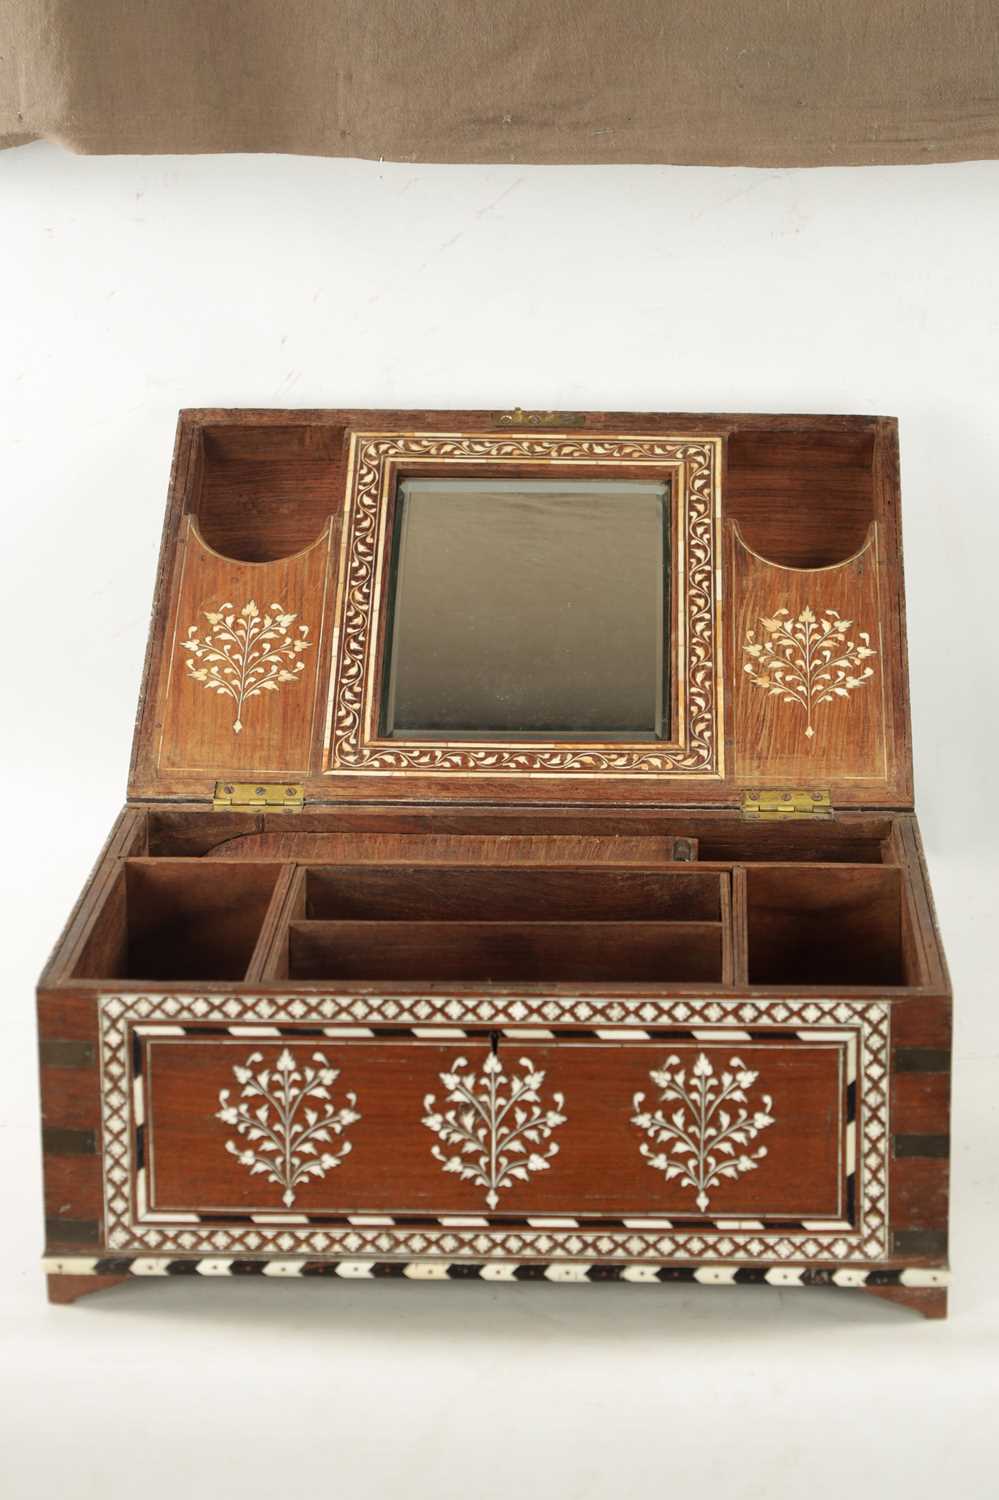 A LARGE LATE 19TH CENTURY ANGLO-INDIAN IVORY AND EBONY INLAID WORKBOX - Image 6 of 10